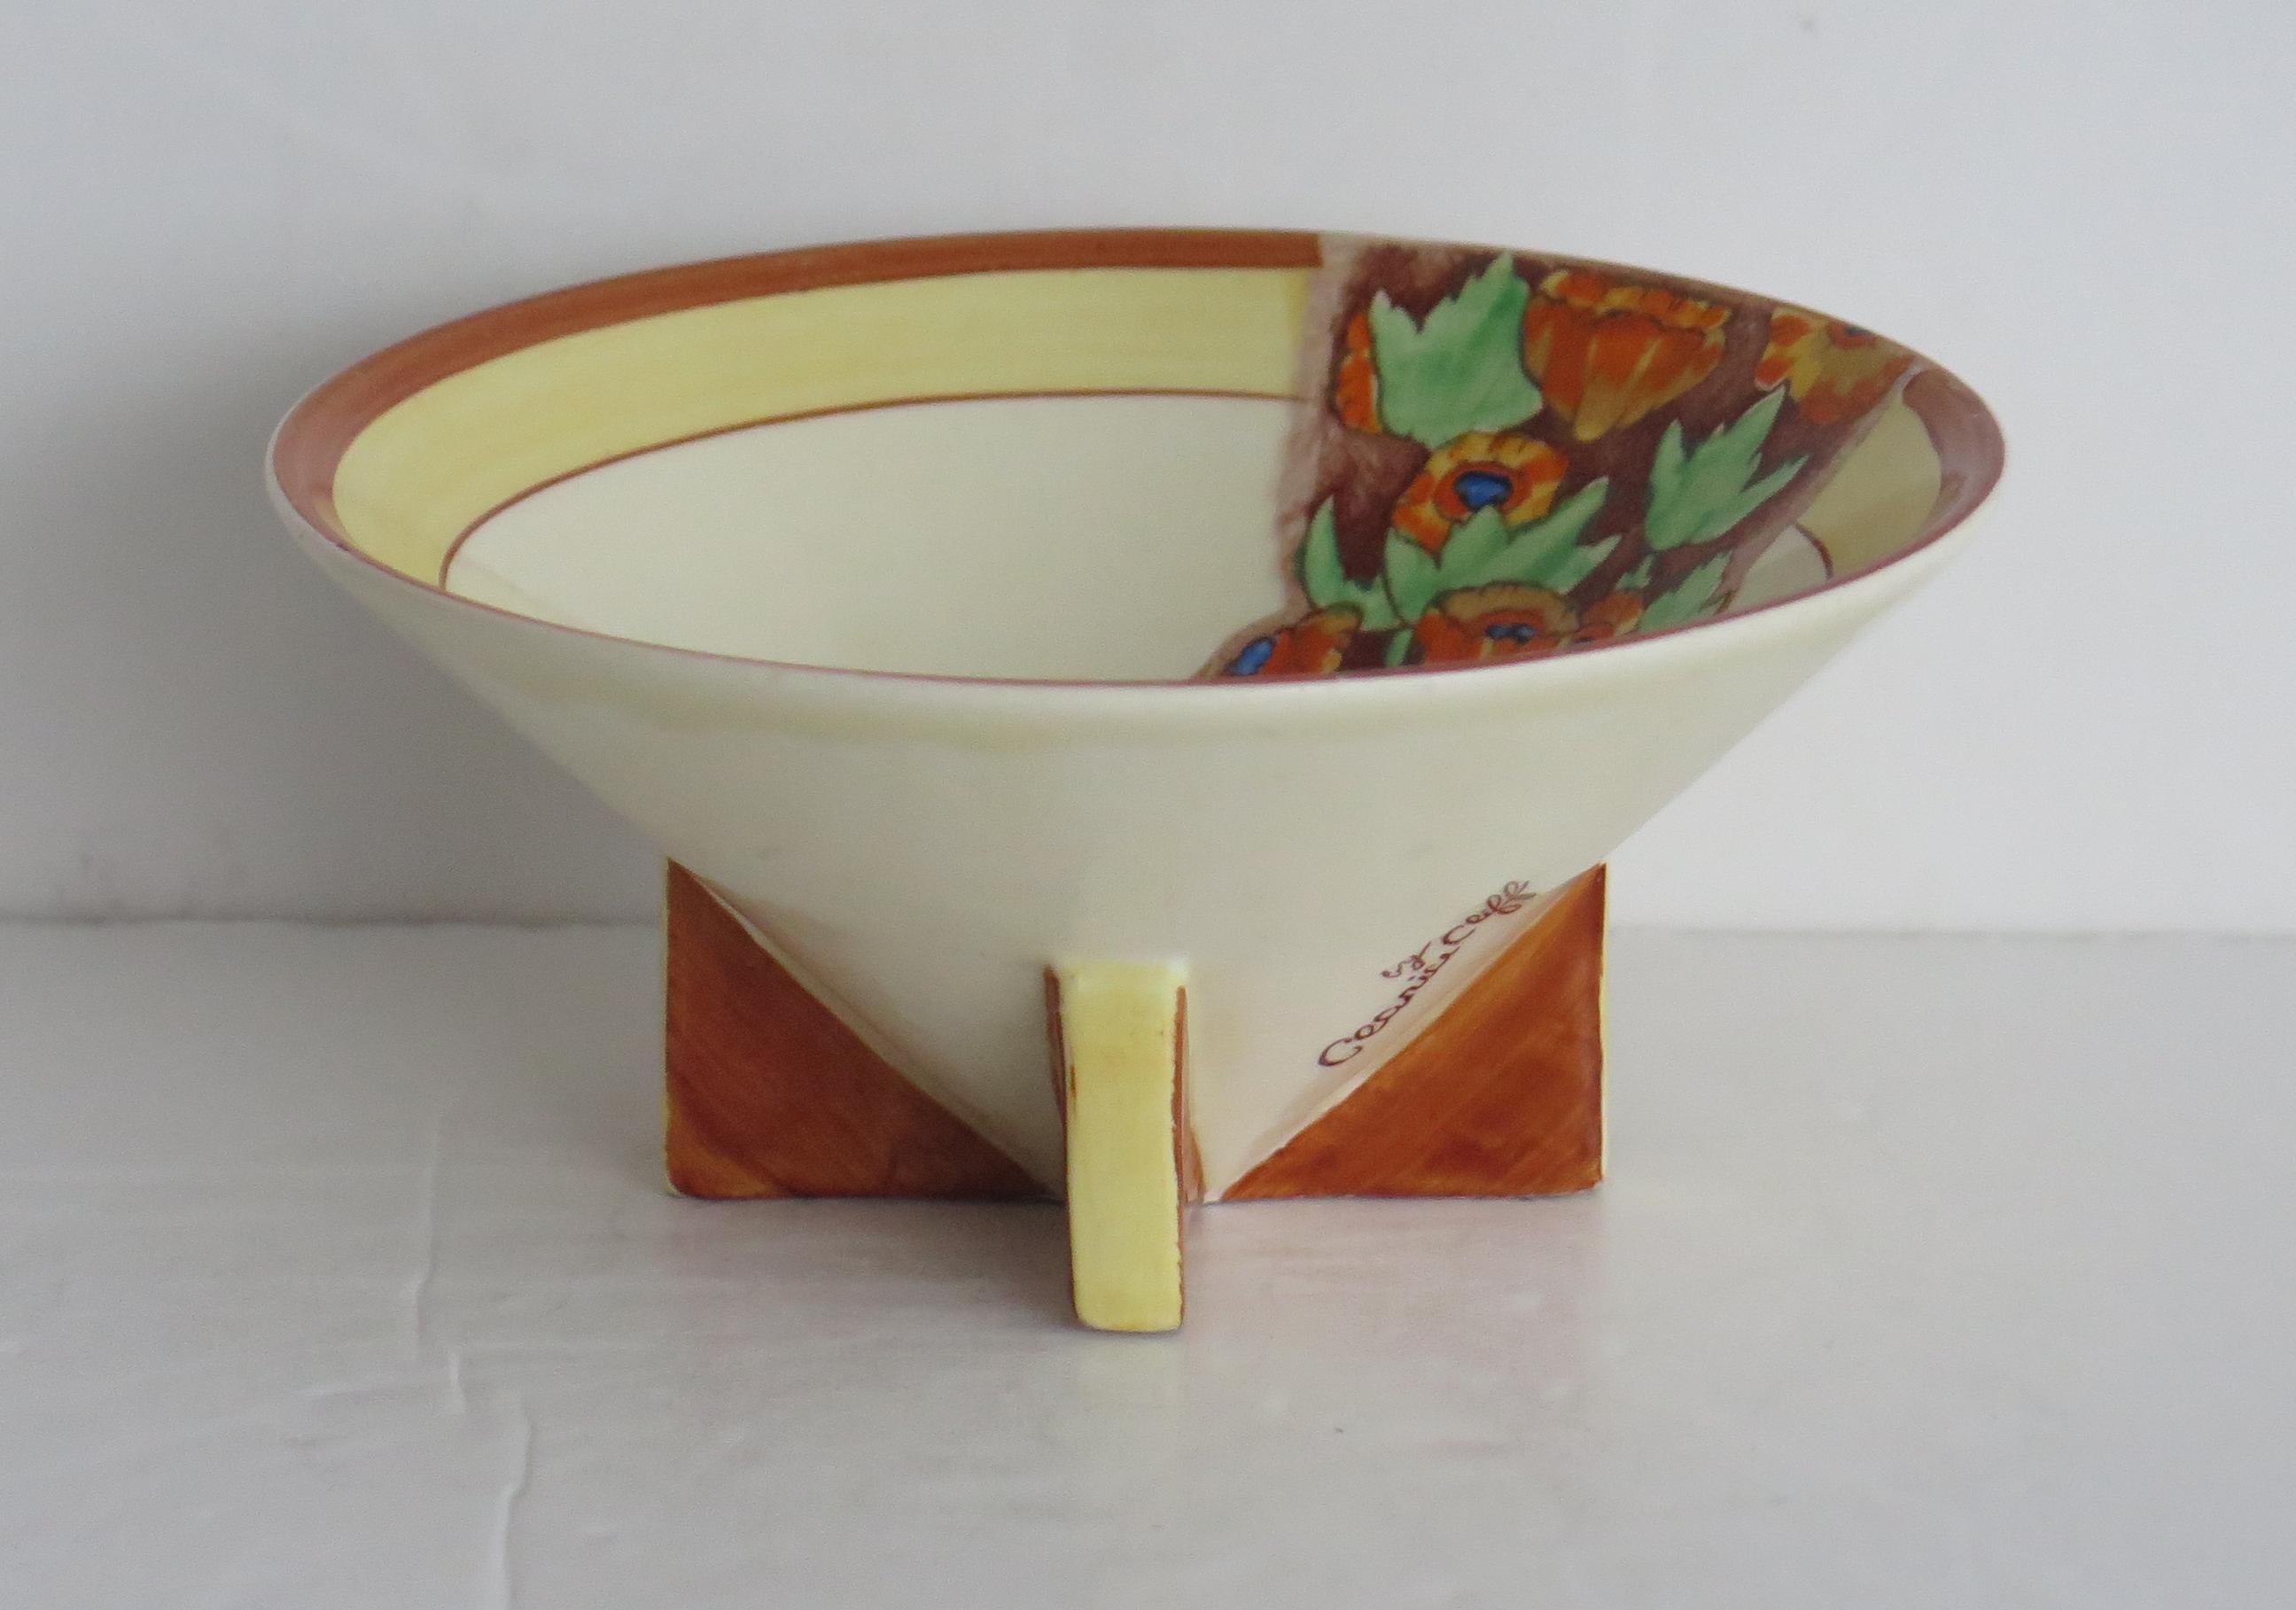 This is a conical bowl by Clarice Cliff in the 